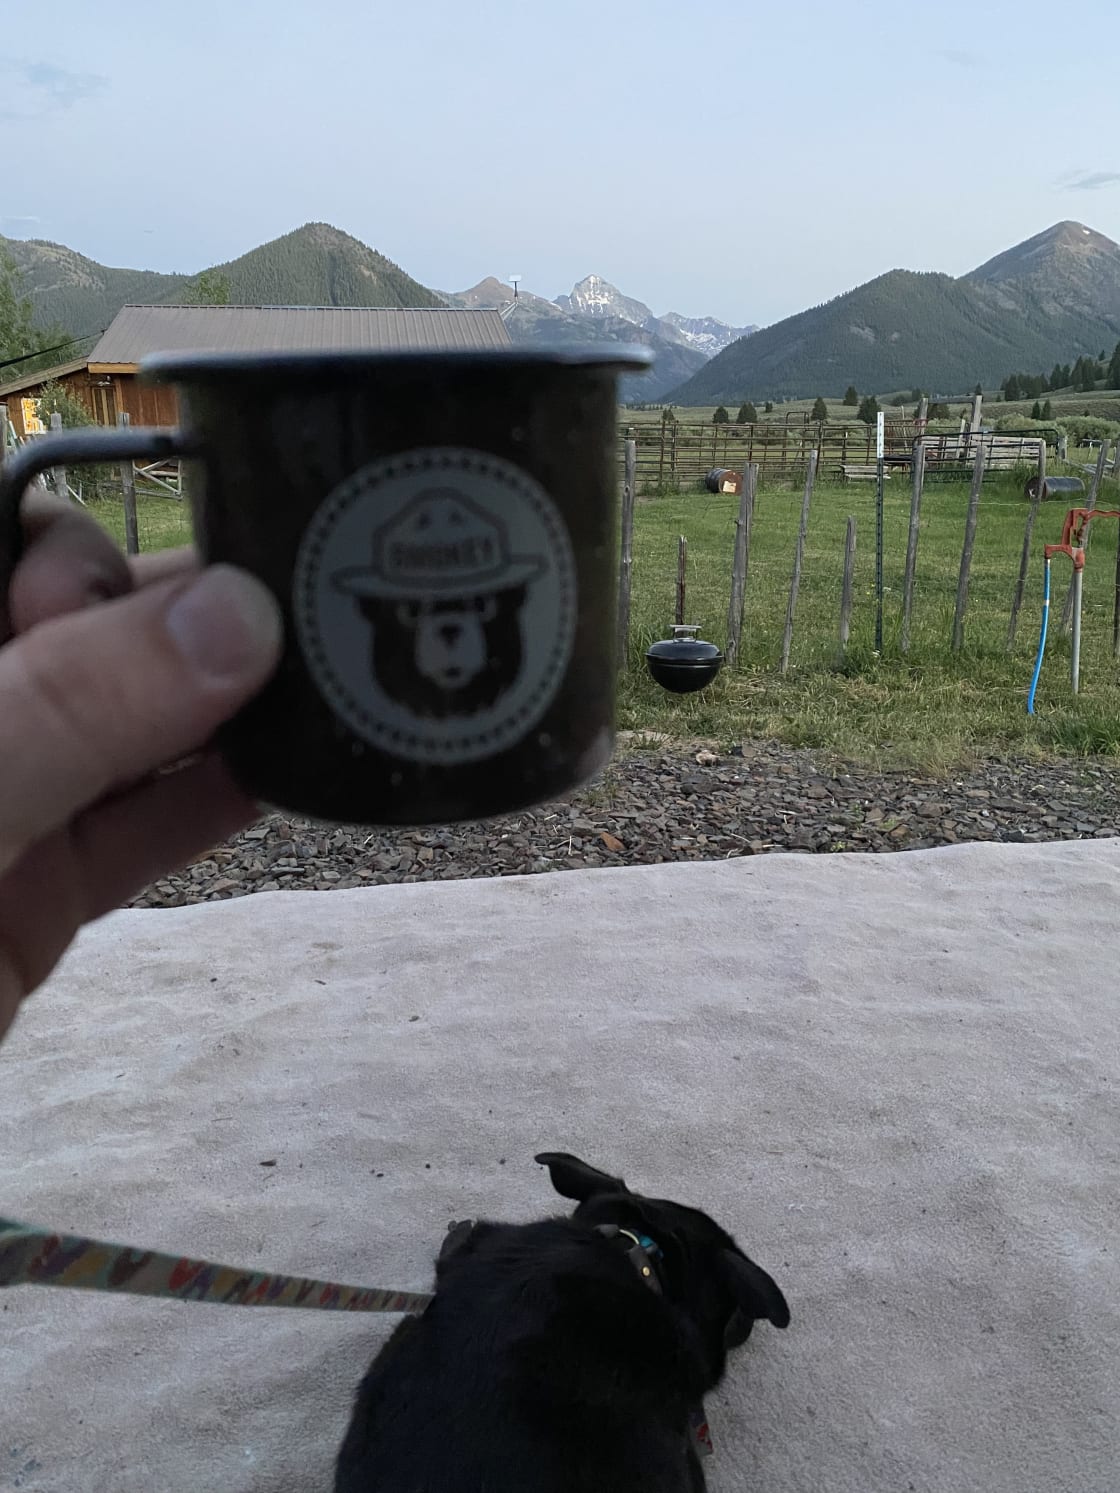 Bourbon in a camp mug is one way to enjoy the evening